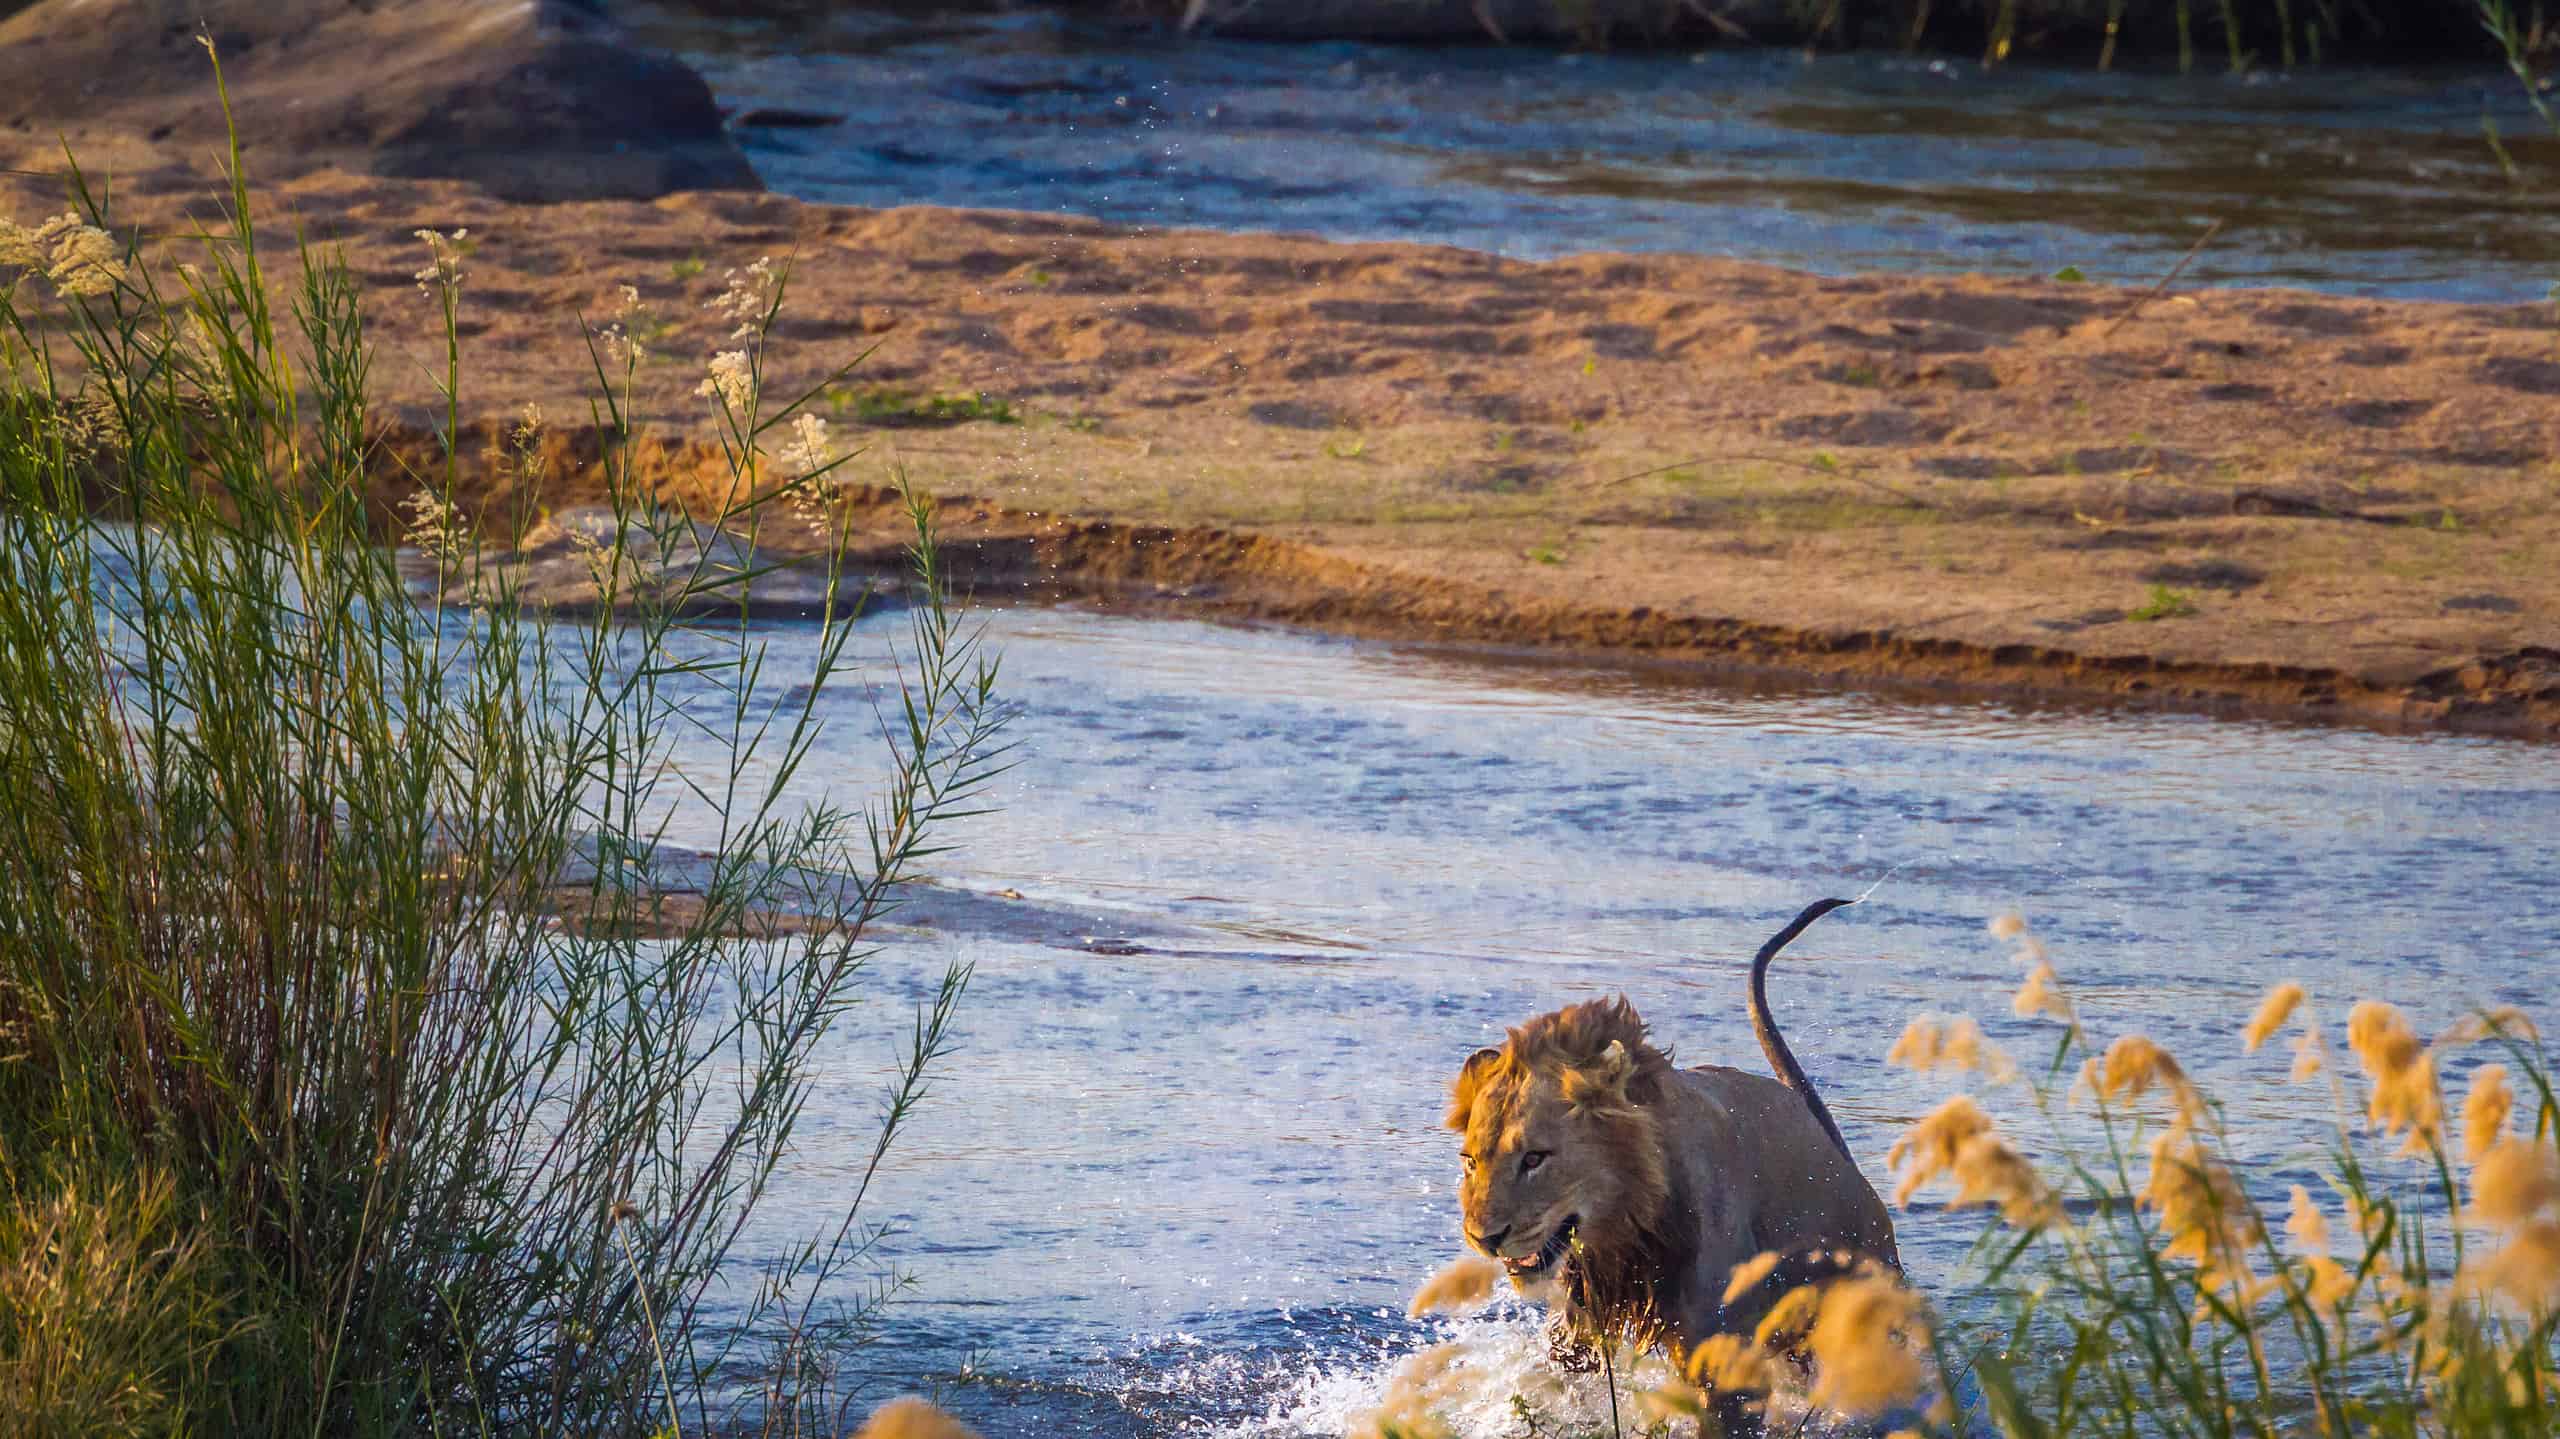 African lion male jumping out of river in Kruger National park, South Africa